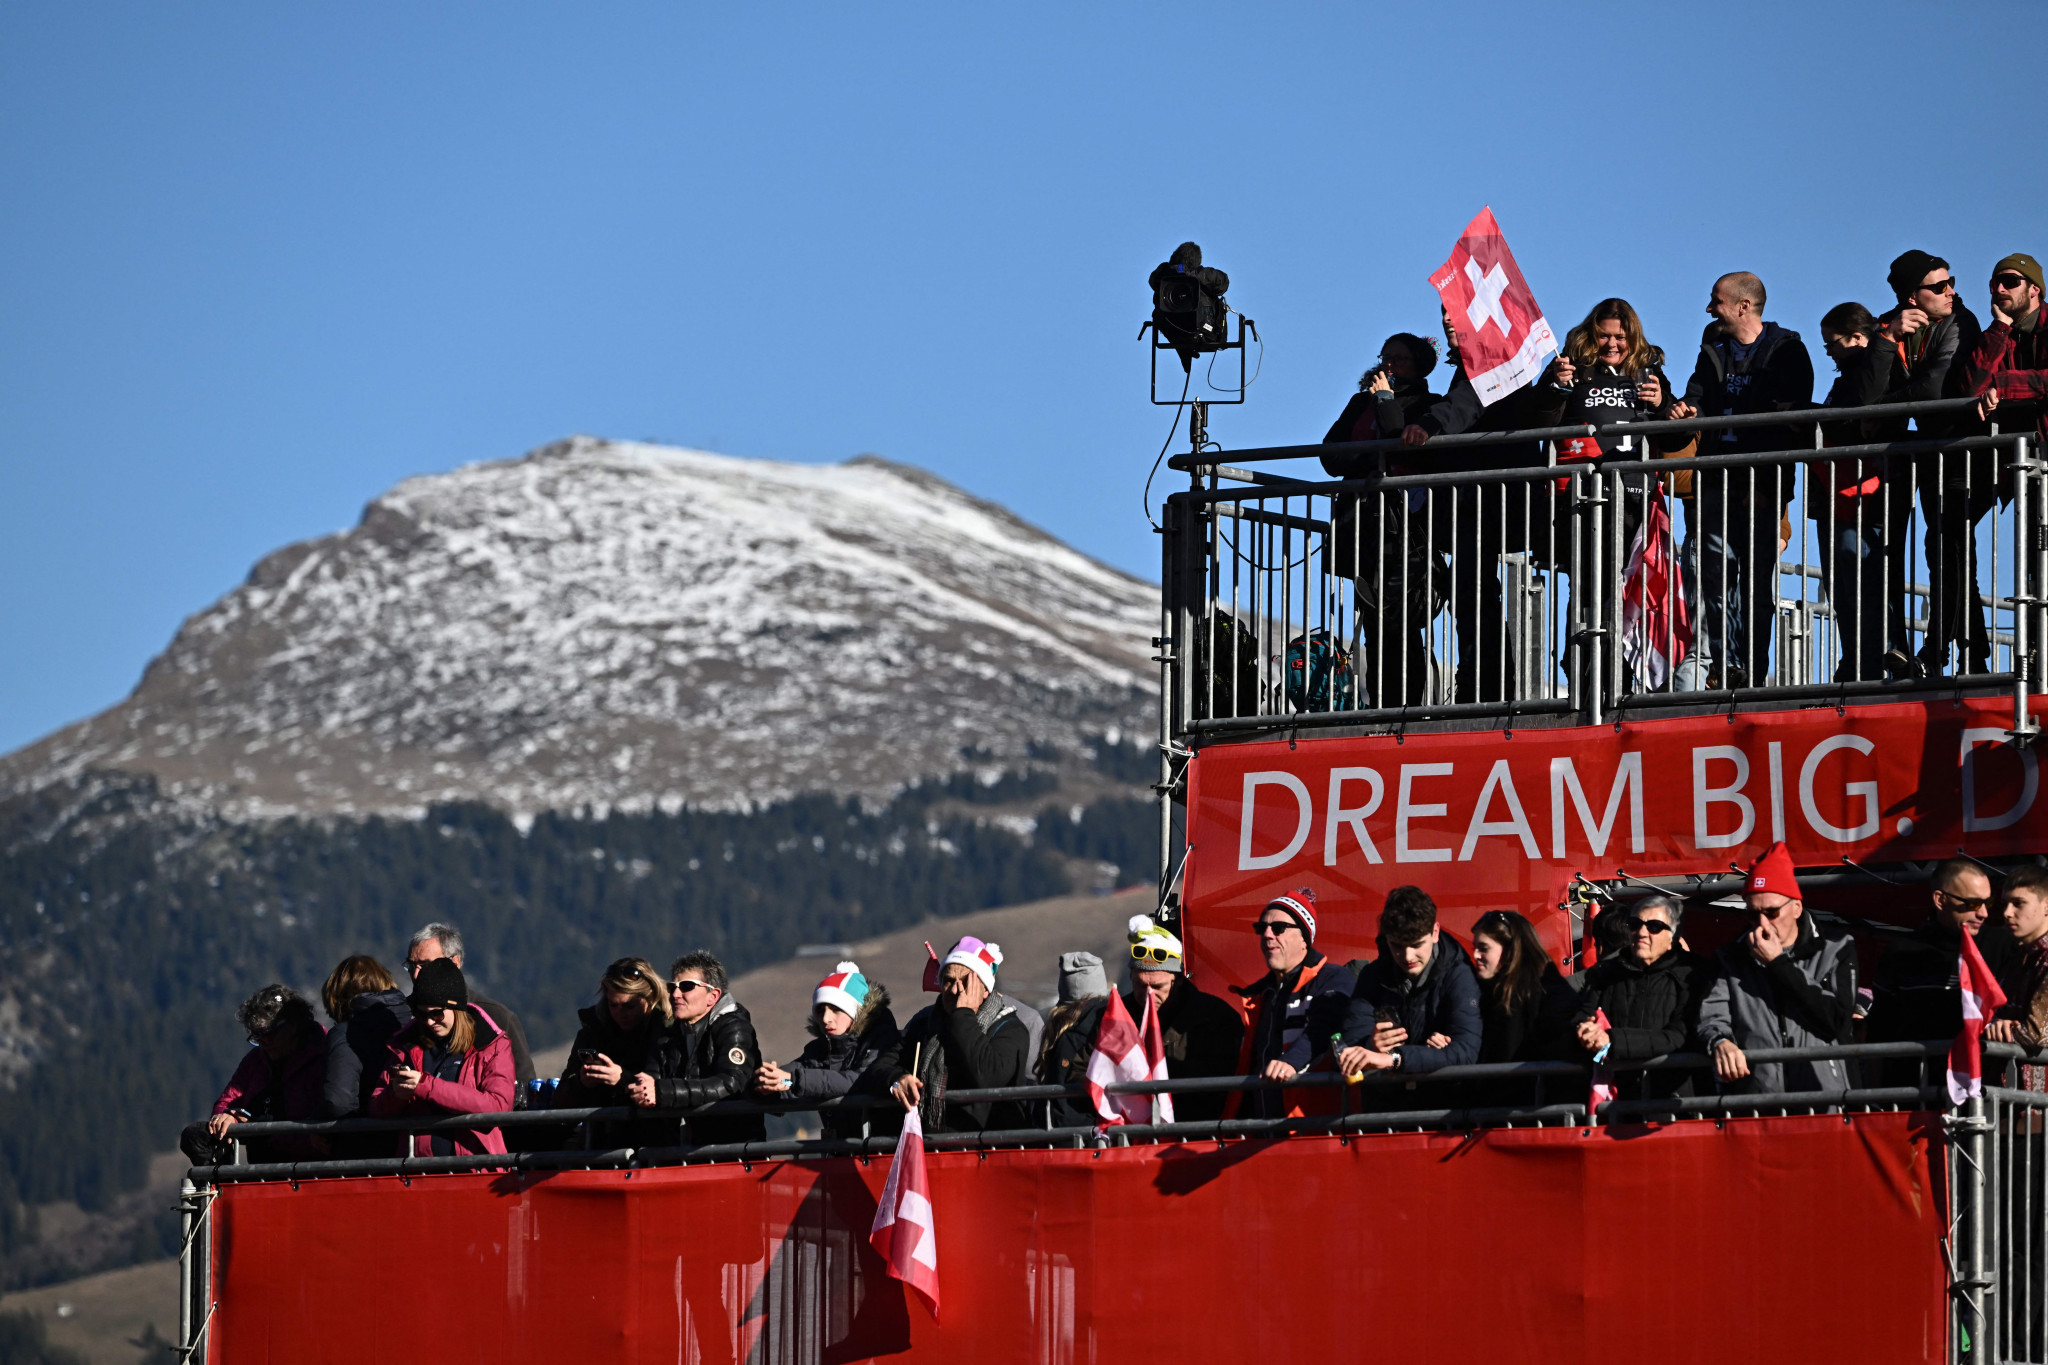 Switzerland reveal vision to become first "host country" of Winter Olympics